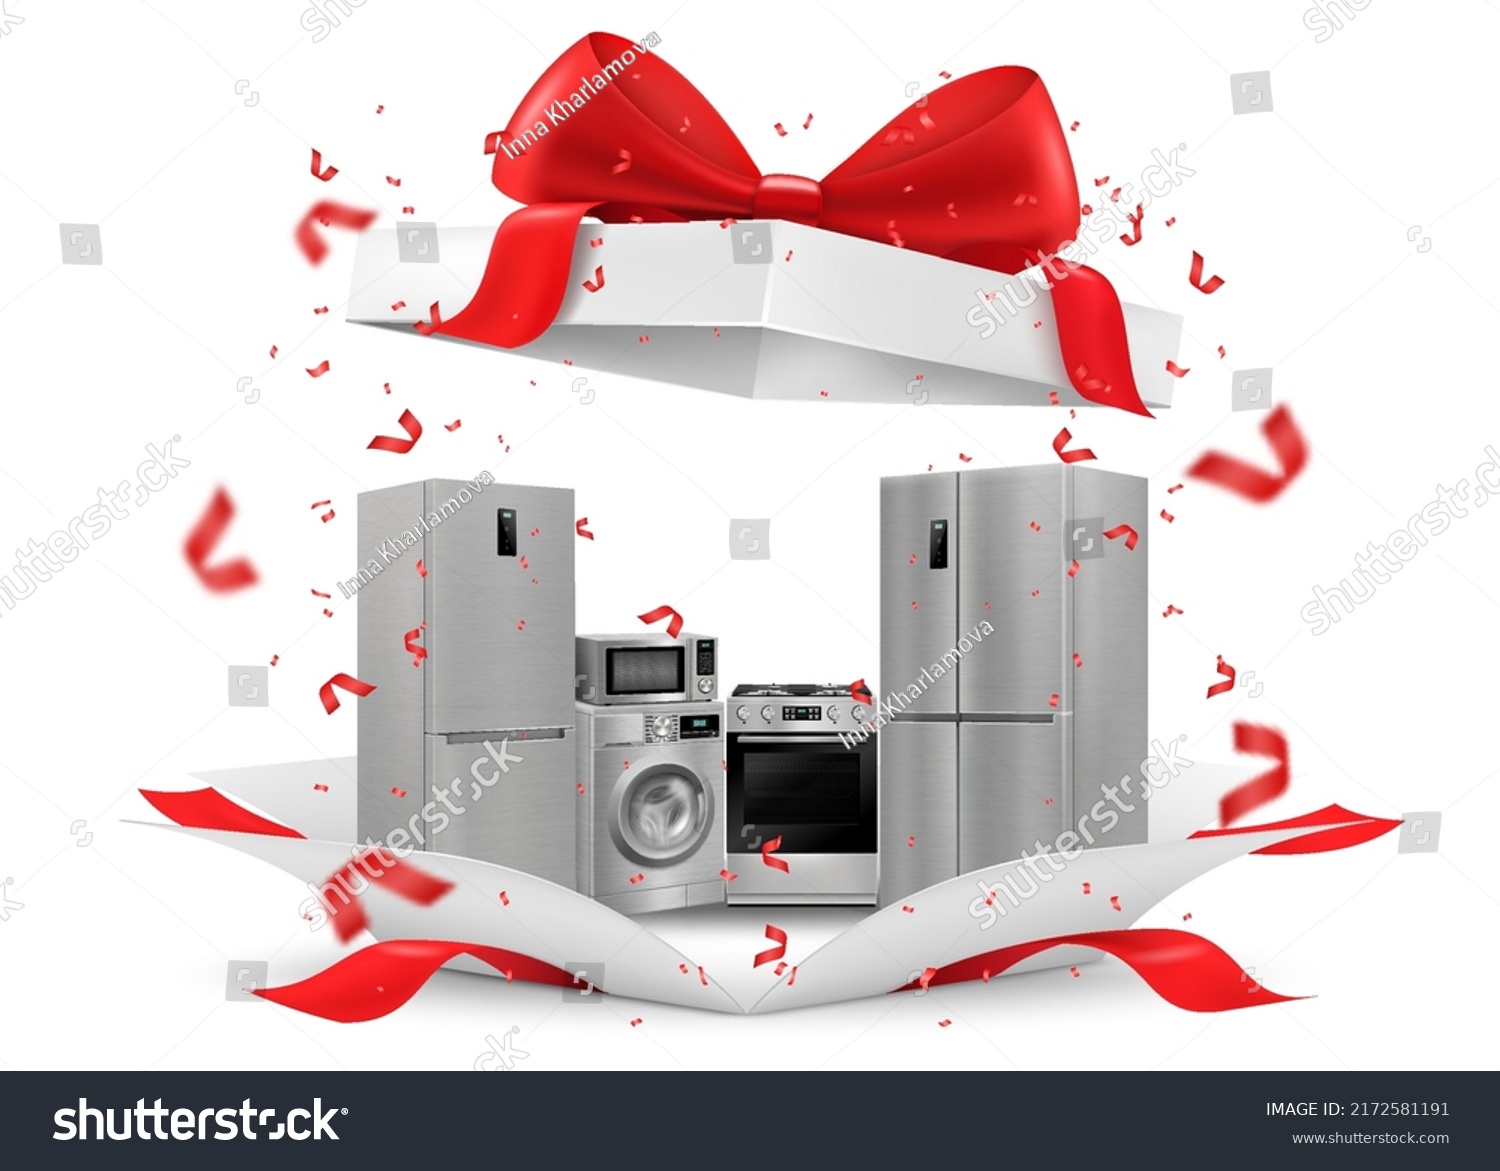 SVG of Gift concept, home appliances inside gift box. Refrigerator, microwave, food processor, TV, washing machine, gas stove, isolated on white background. 3D rendering. Realistic vector illustration svg